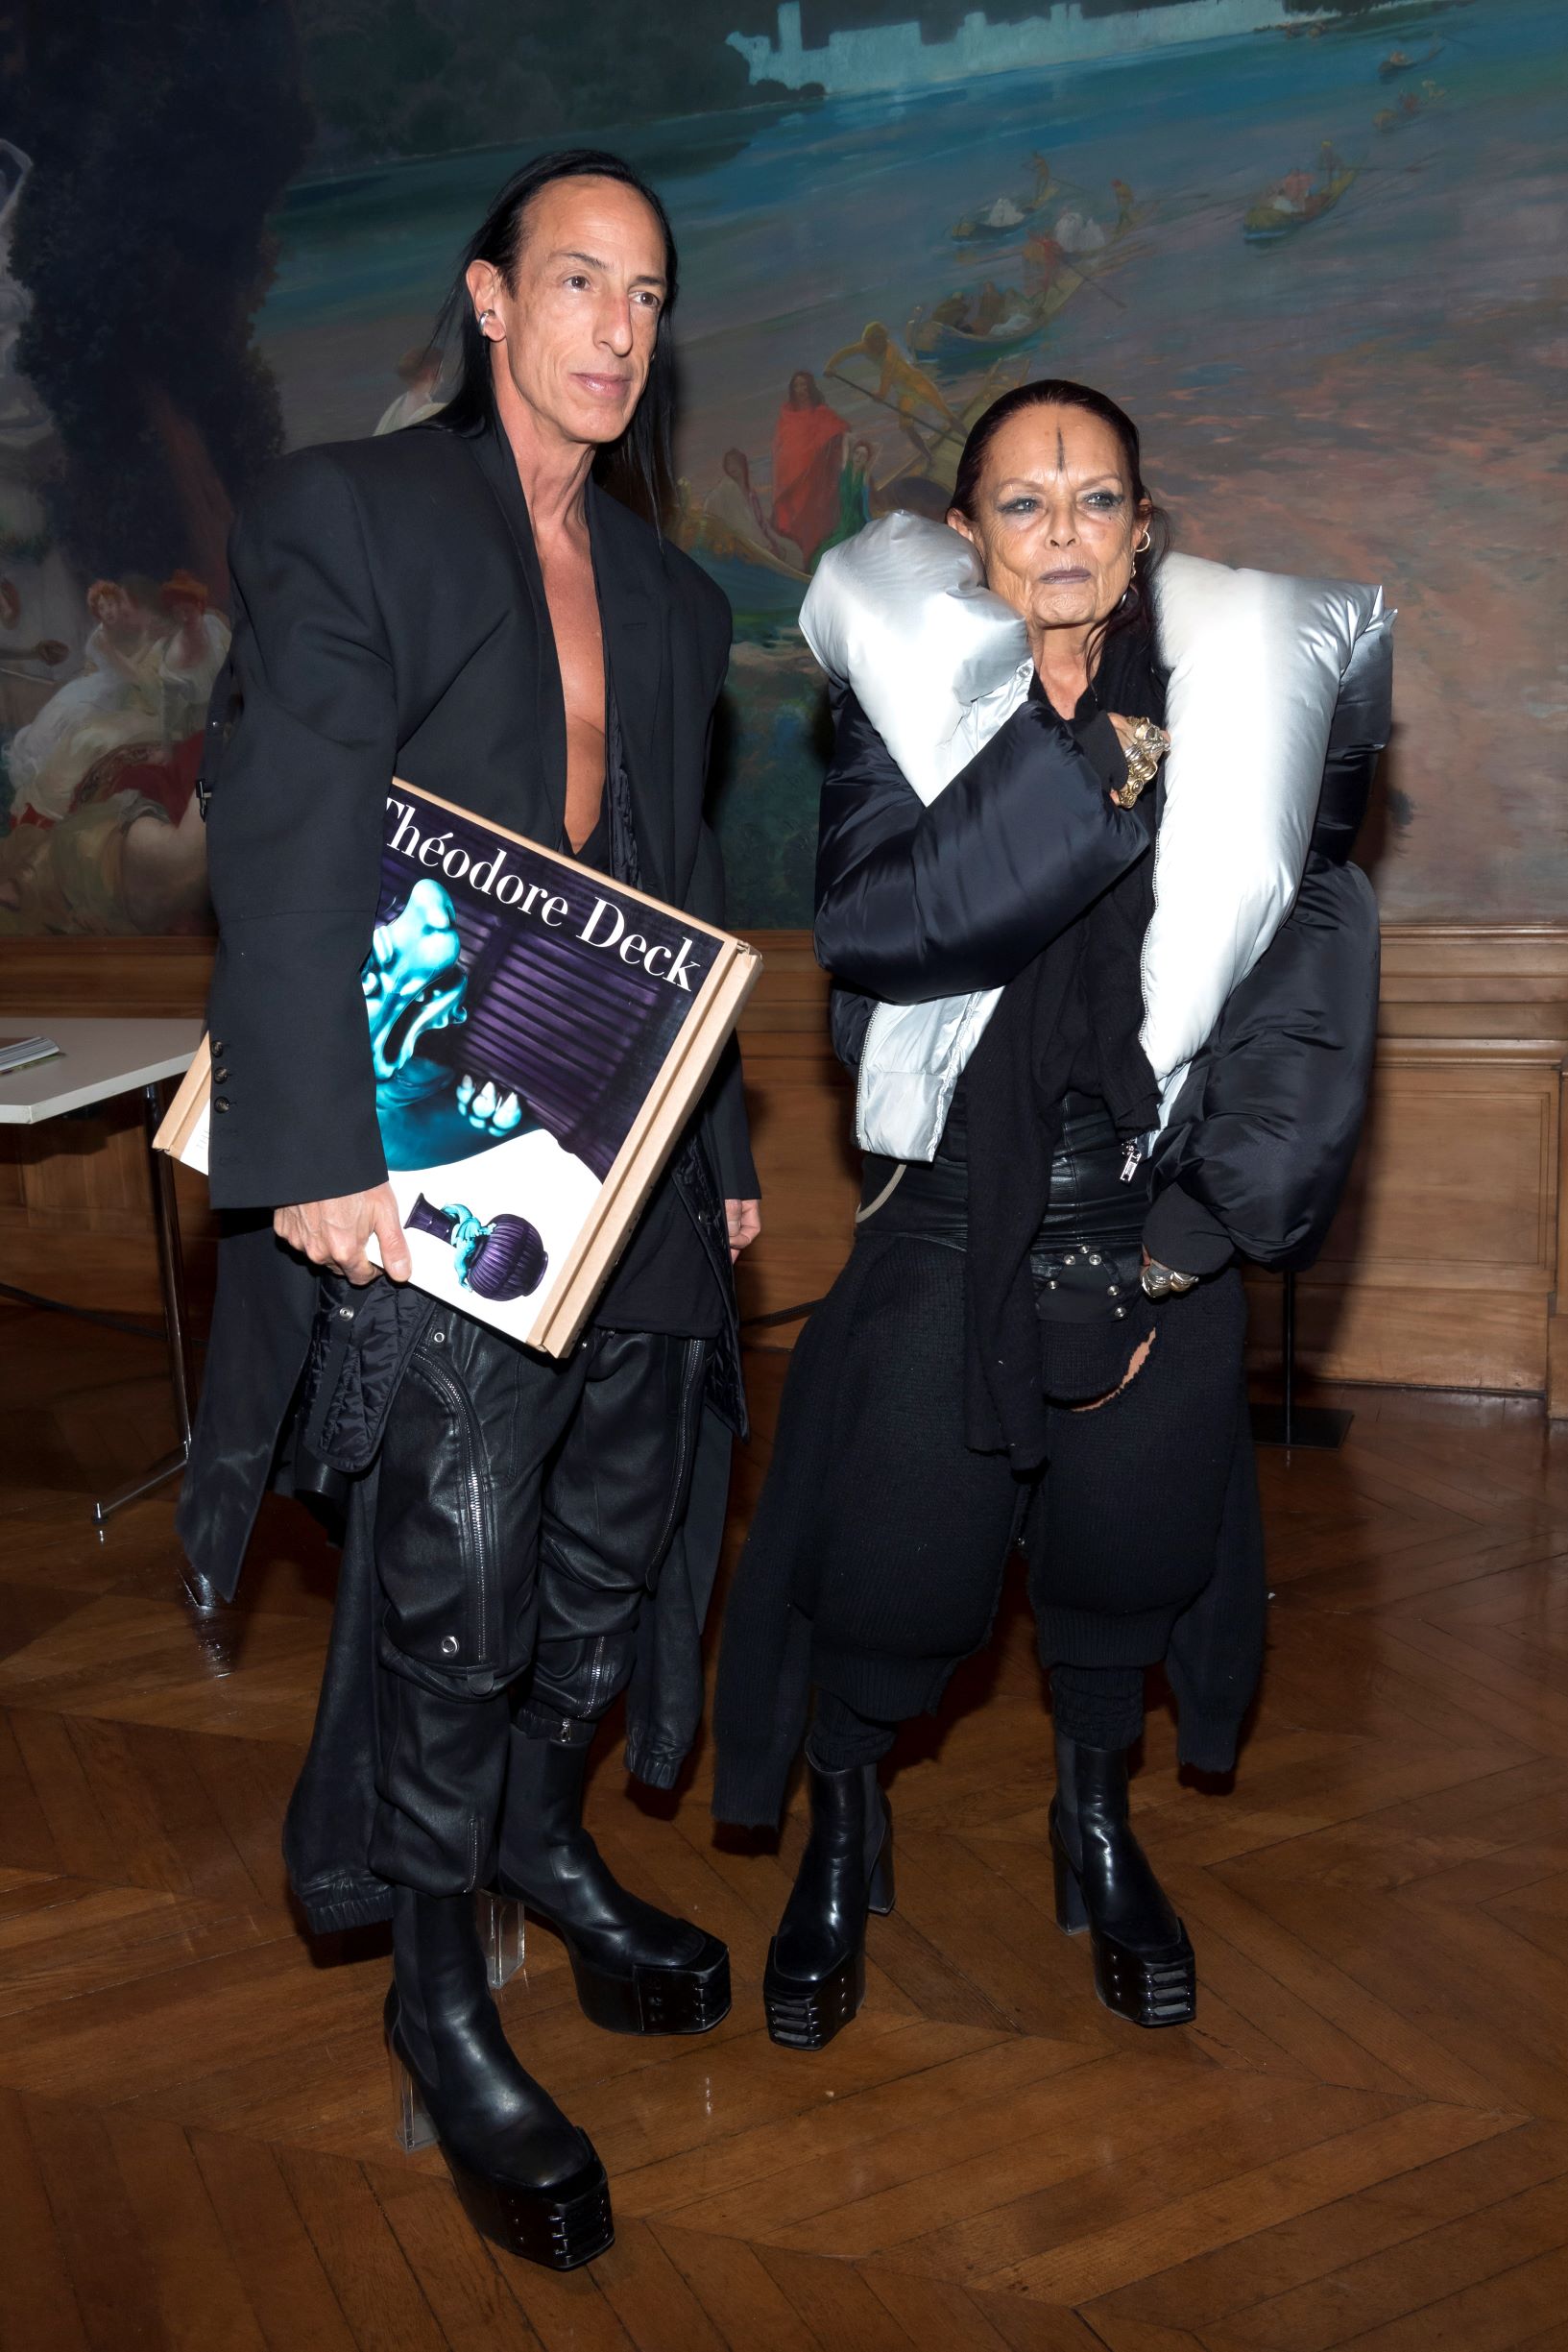 Rick Owens and Michèle Lamy at the Musée des Arts Décoratifs in Paris for Peter Marino's Théodore Deck book signing. Owens carries a copy of Théodore Deck. Photographs by Luc Castel